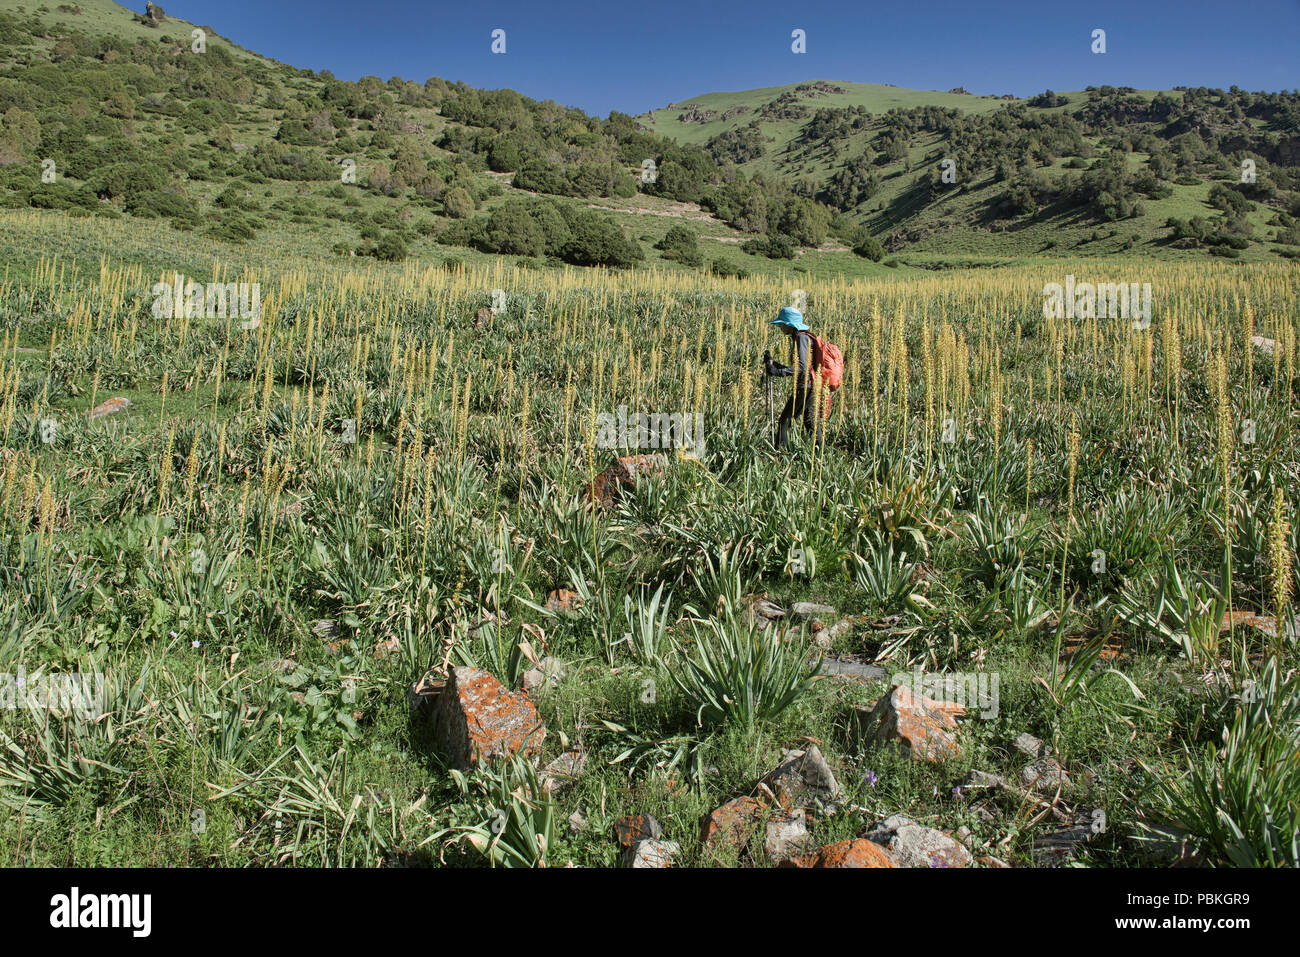 Trekking amongst foxtail lilies (Eremurus) on the Heights of Alay route, Alay, Krygyzstan Stock Photo